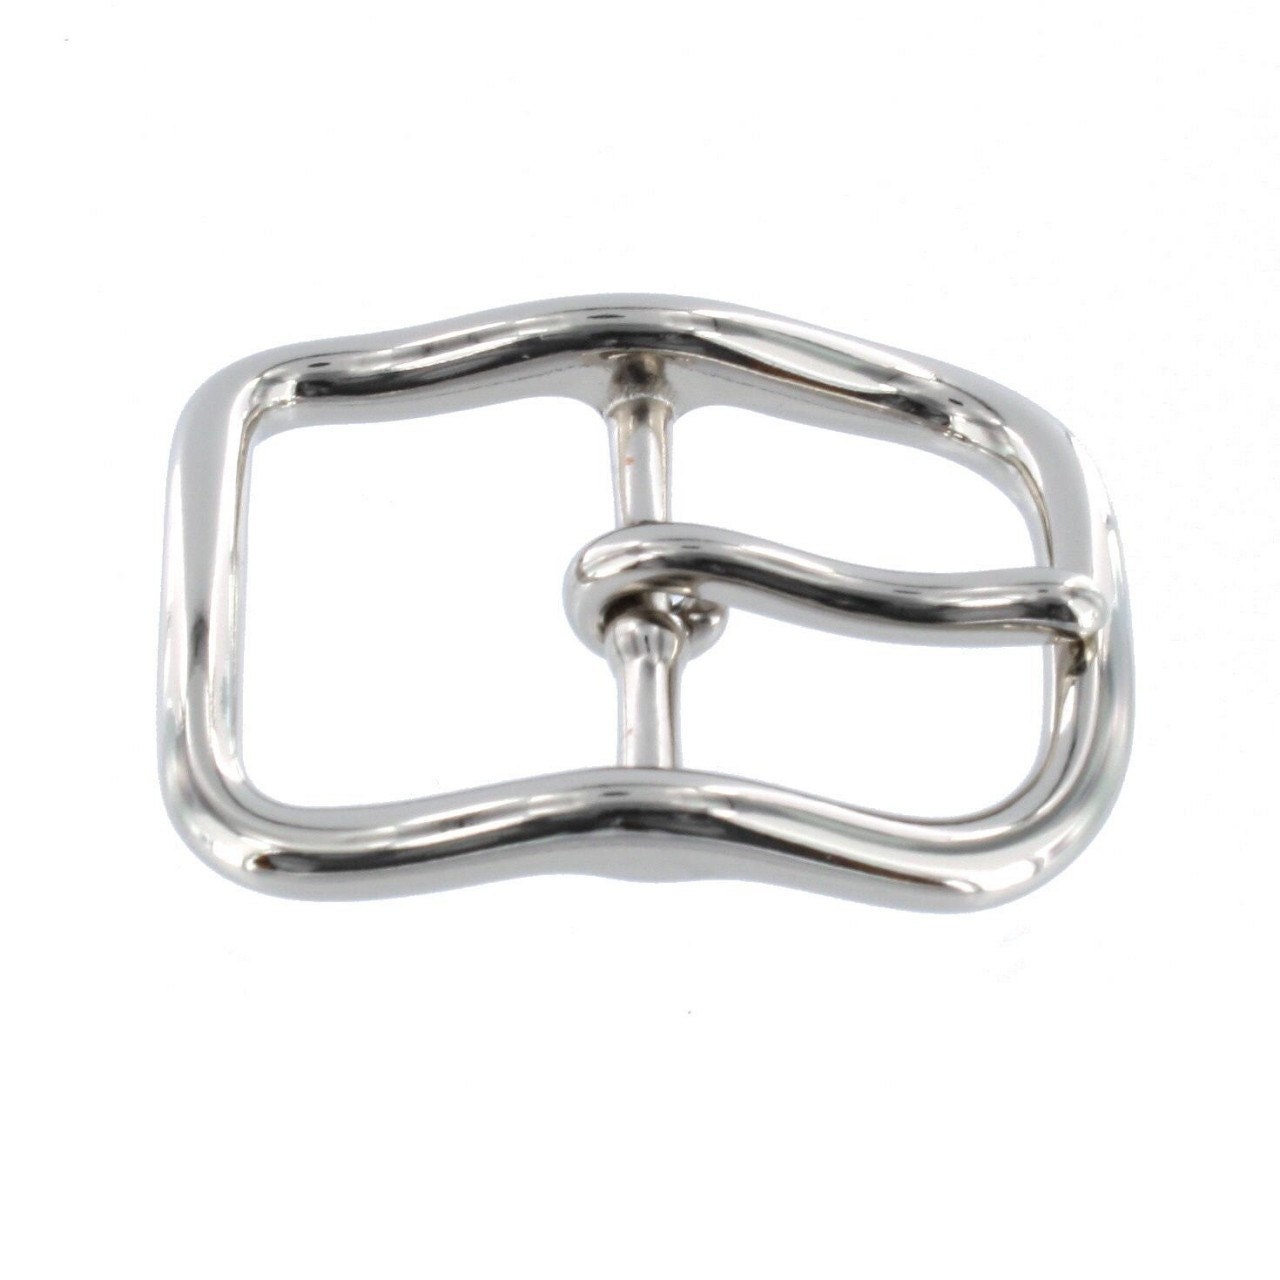 G4753 32mm Nickel Plate, Center Bar Buckle, Solid Brass from ...